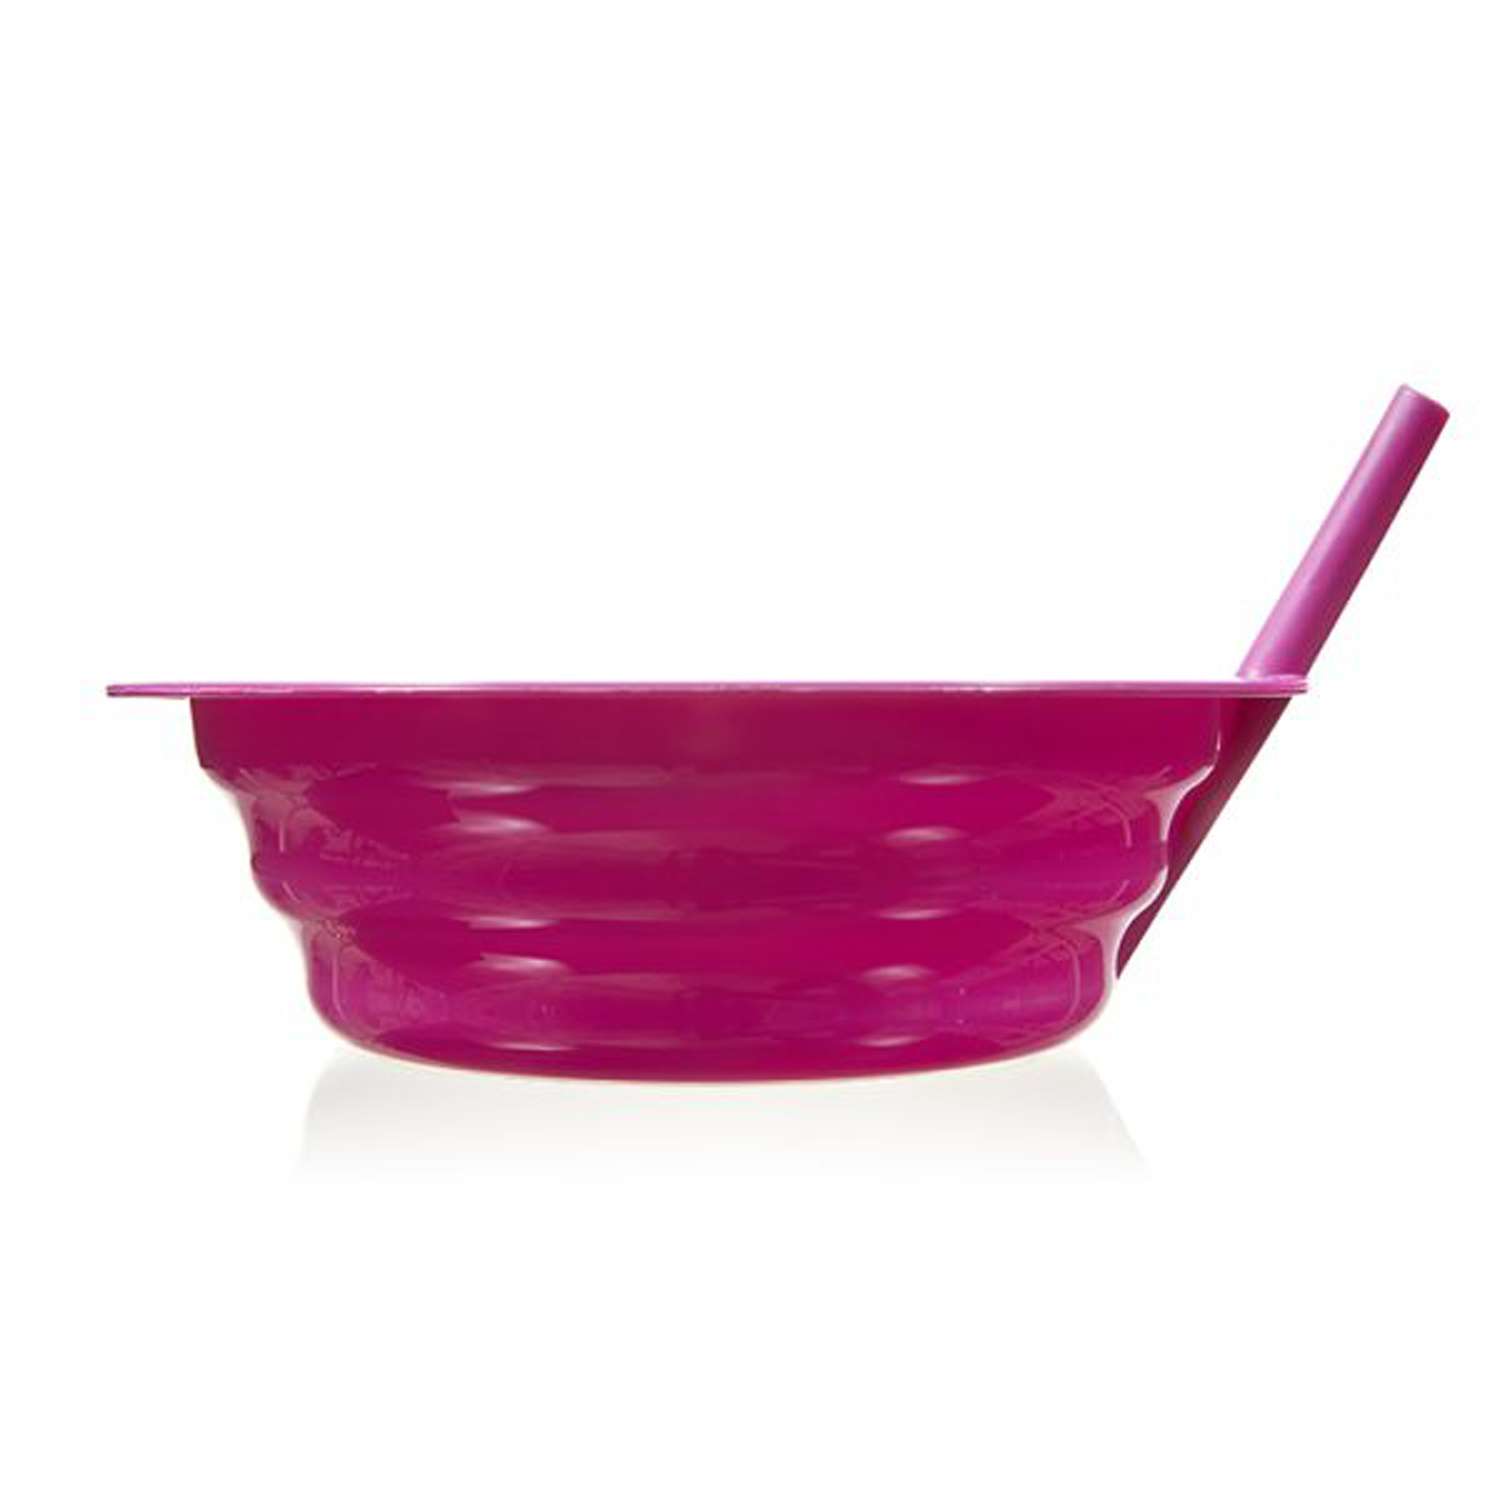 Arrow Home Products 6 qt Polypropylene Assorted Bowl 1 pc - Ace